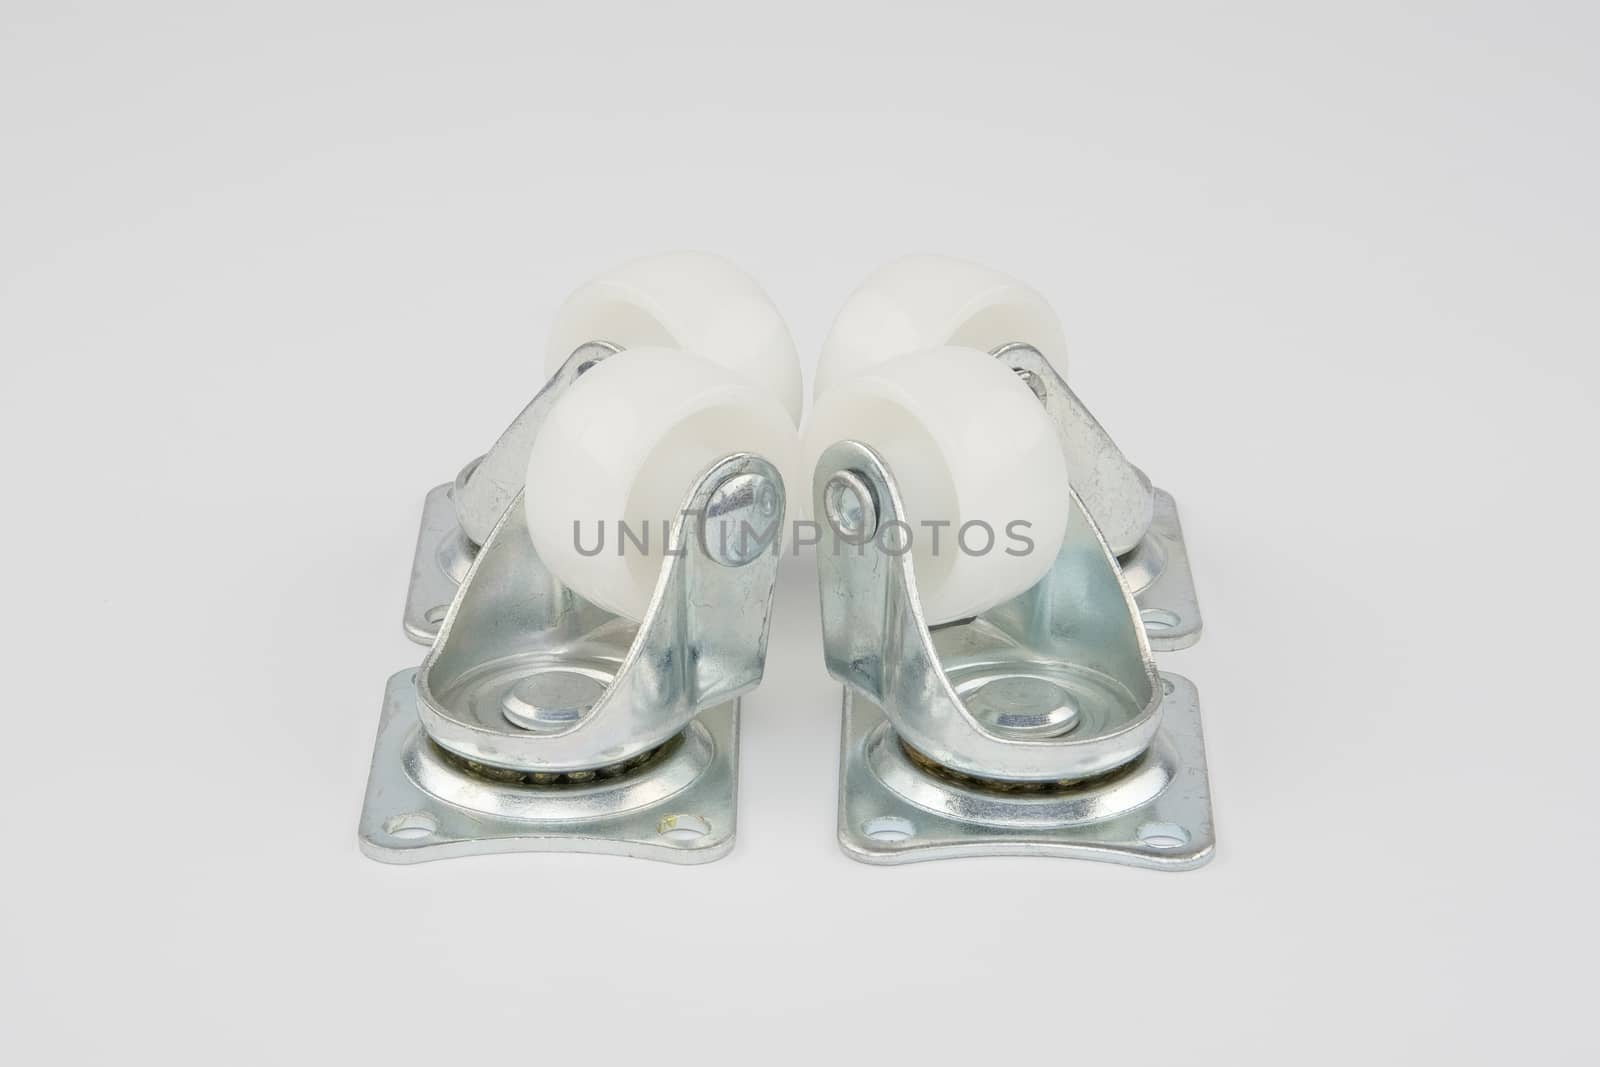 Industrial trolley swivel plastic caster wheels on white background by eaglesky